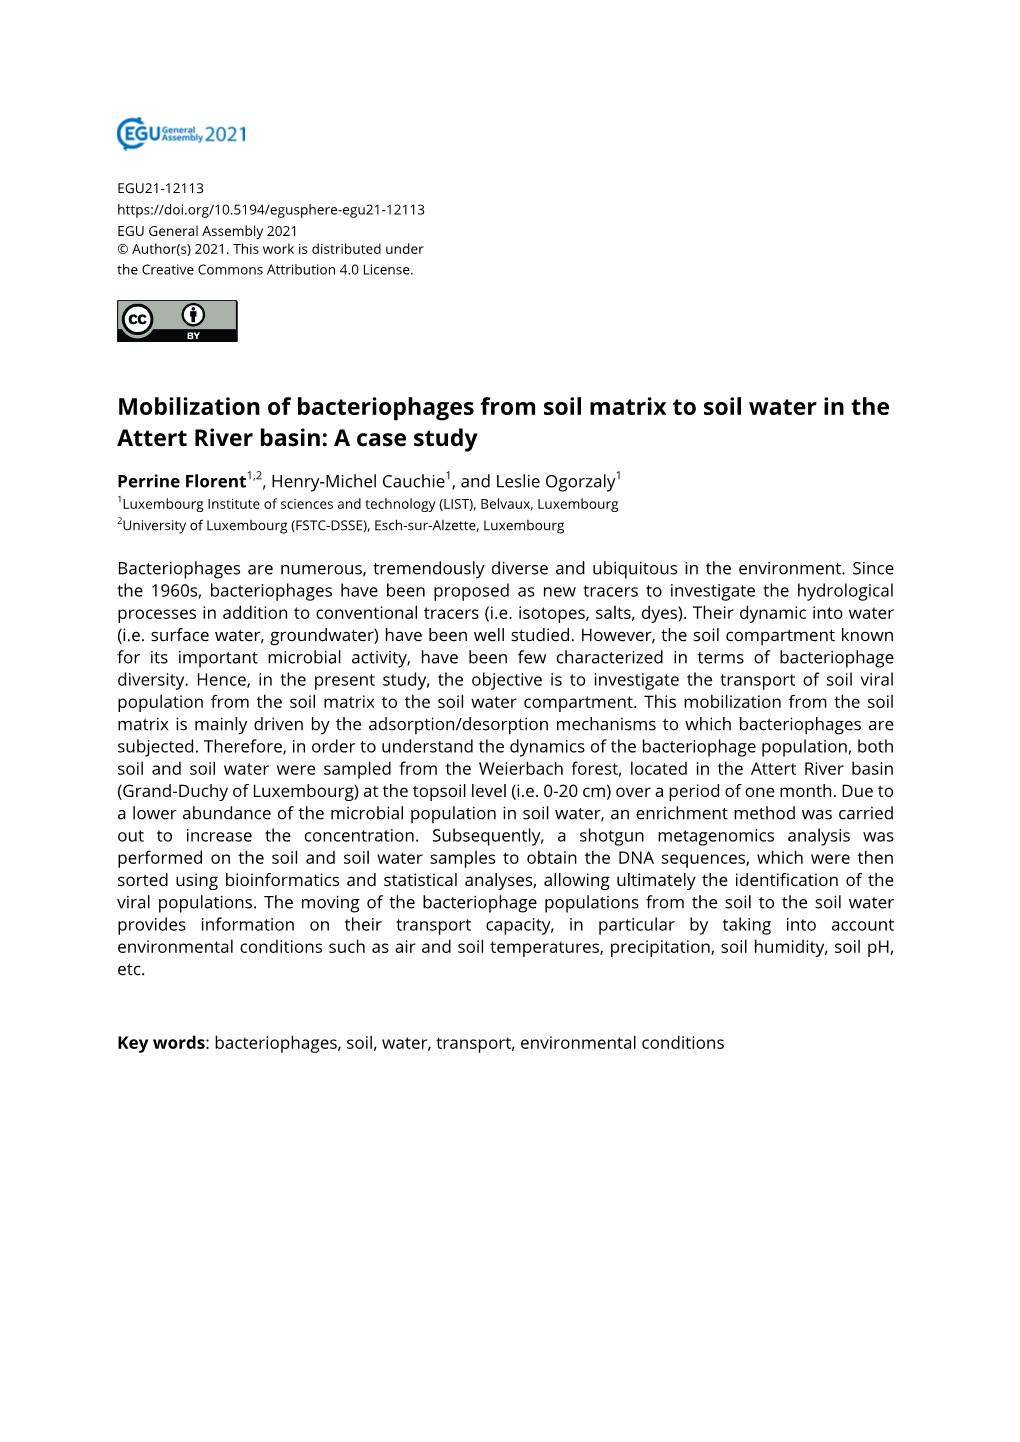 Mobilization of Bacteriophages from Soil Matrix to Soil Water in the Attert River Basin: a Case Study